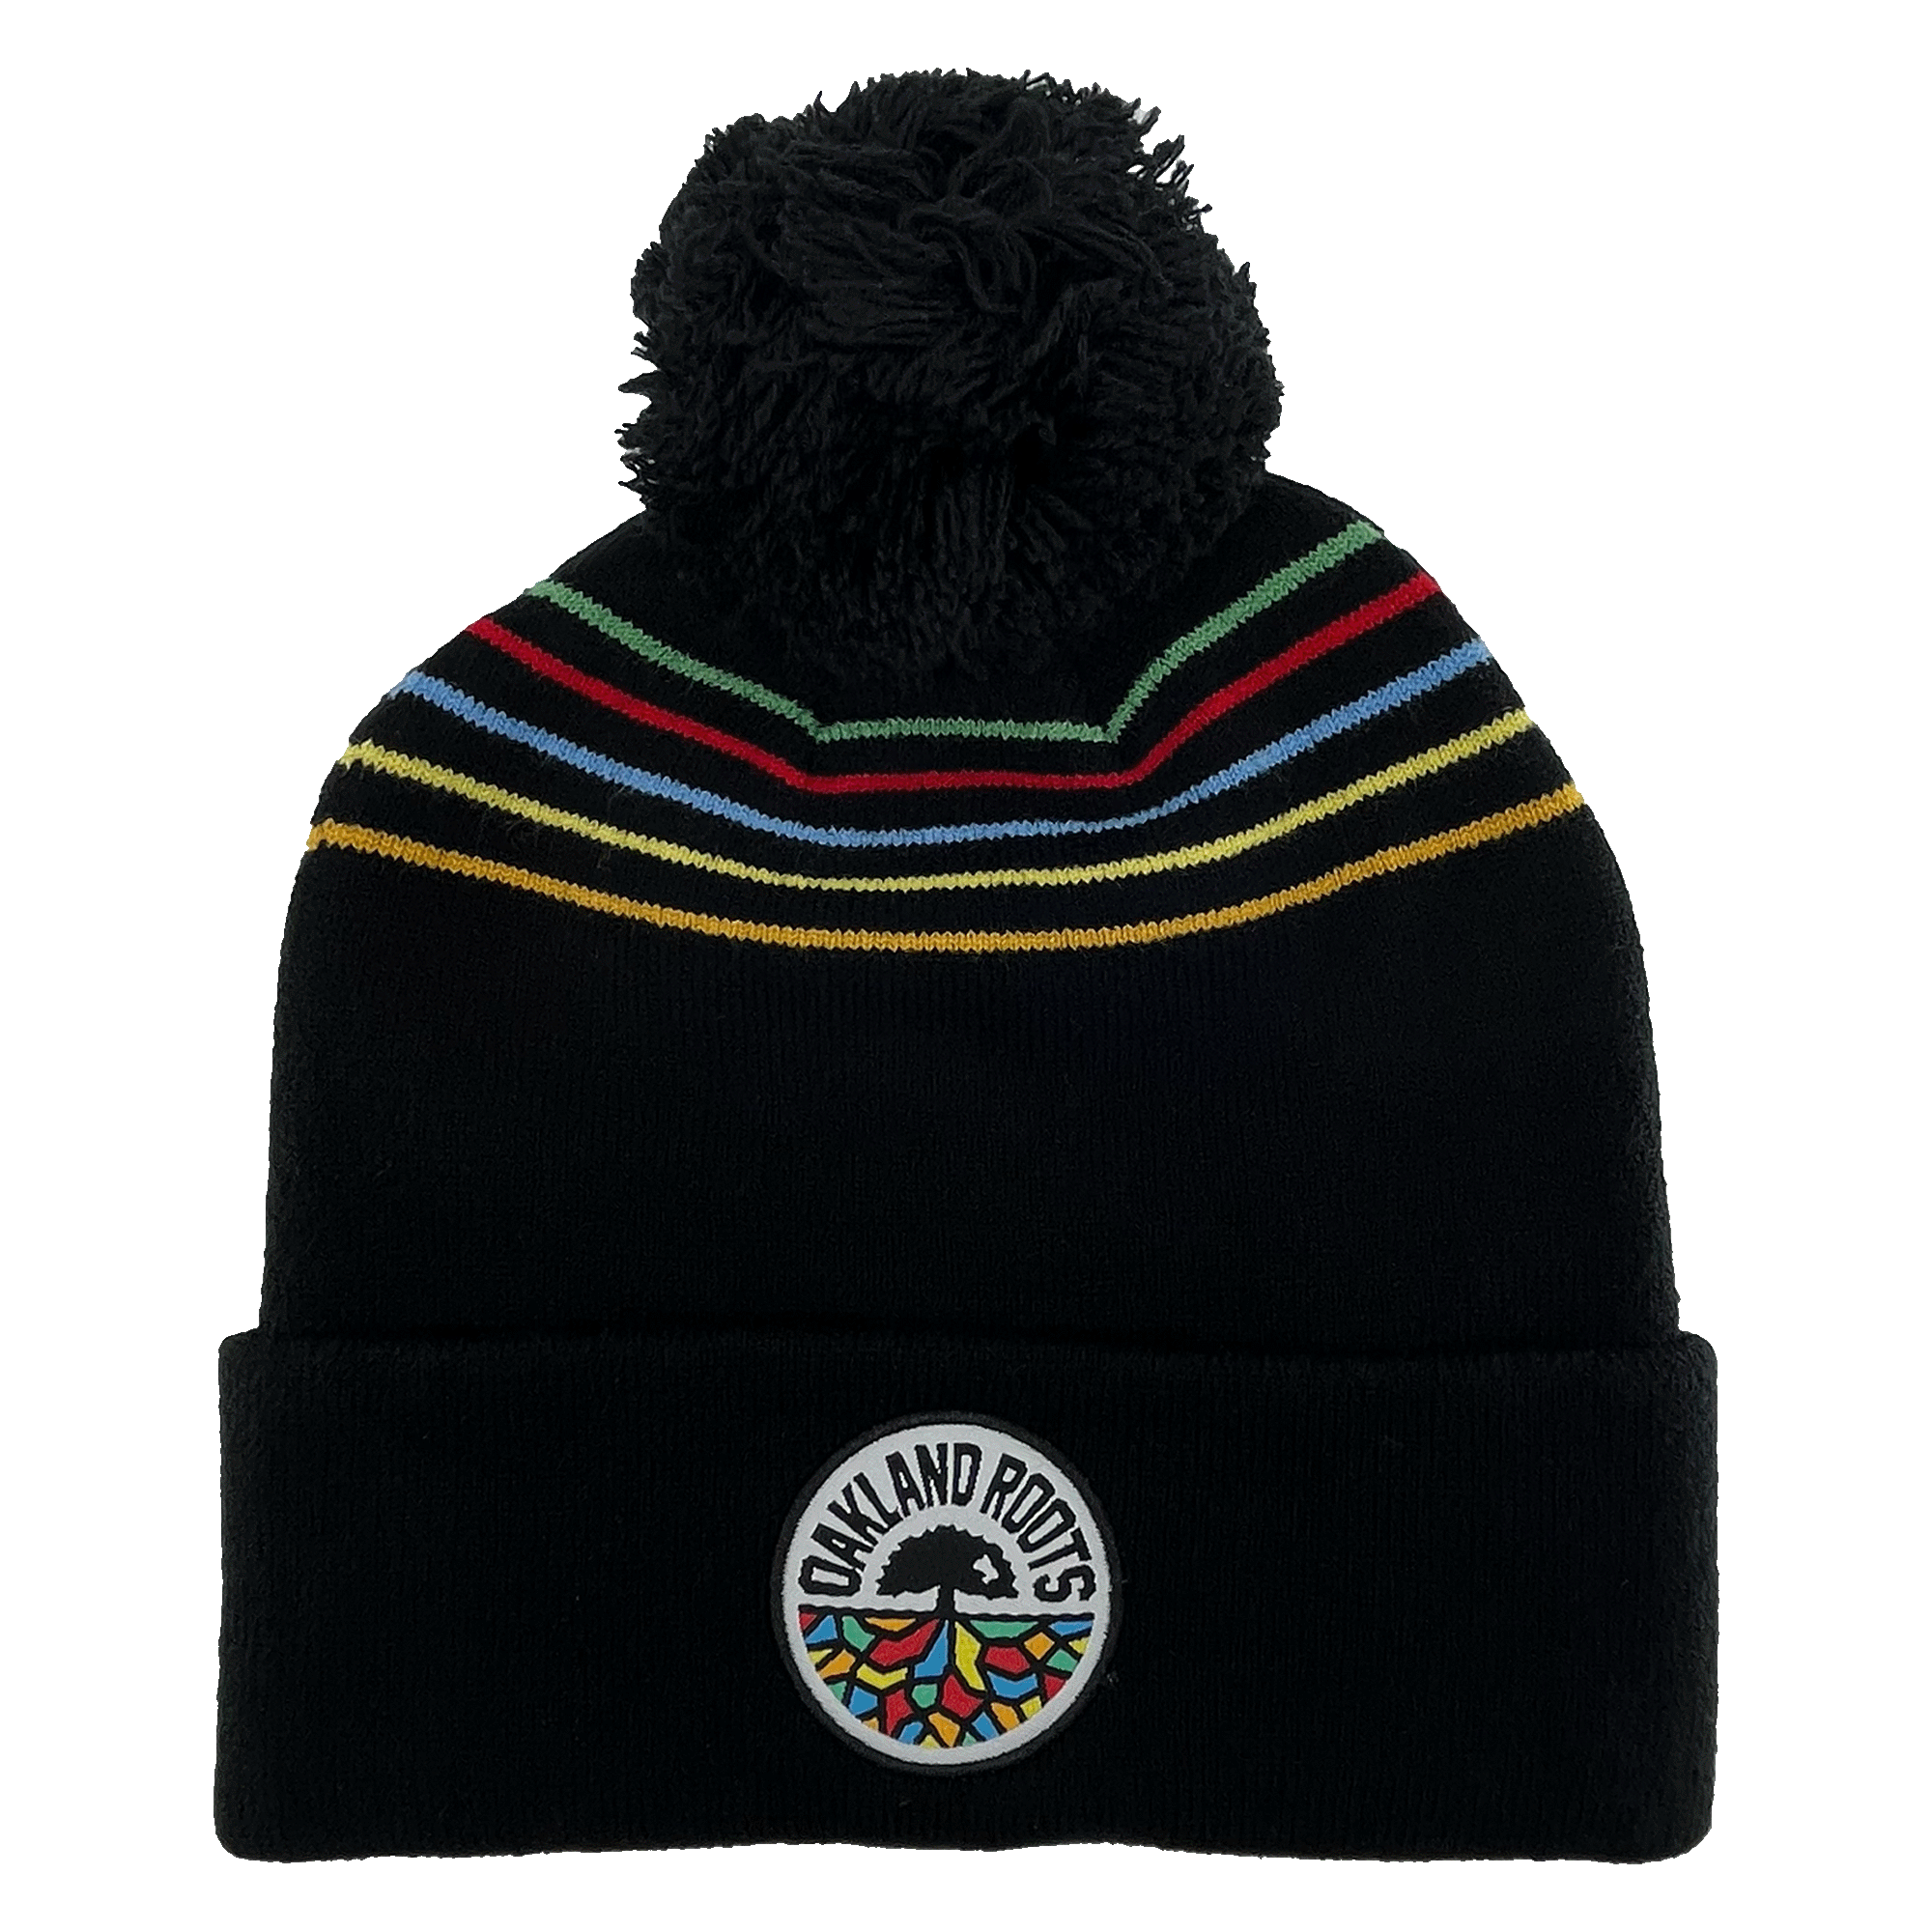 Black woven pom beanie with full-color Oakland Roots circle logo on the rolled cuff and colored stripes on the crown.